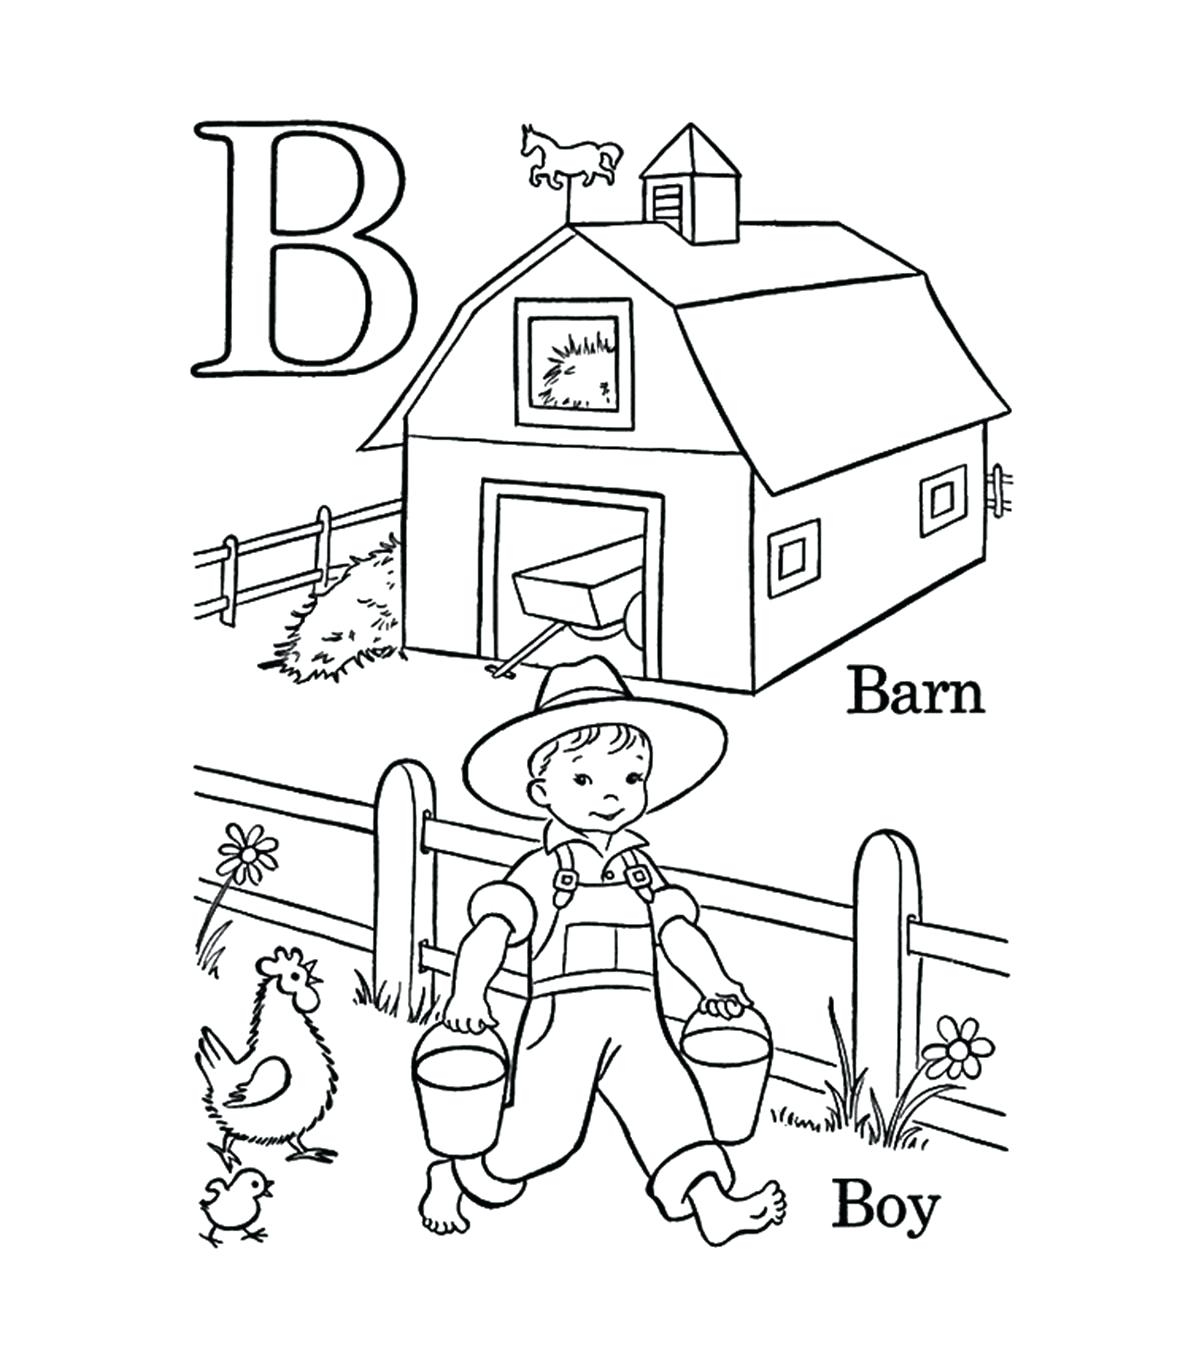 B Coloring Pages Coloring Pages Of Letter B Maydaysheetco